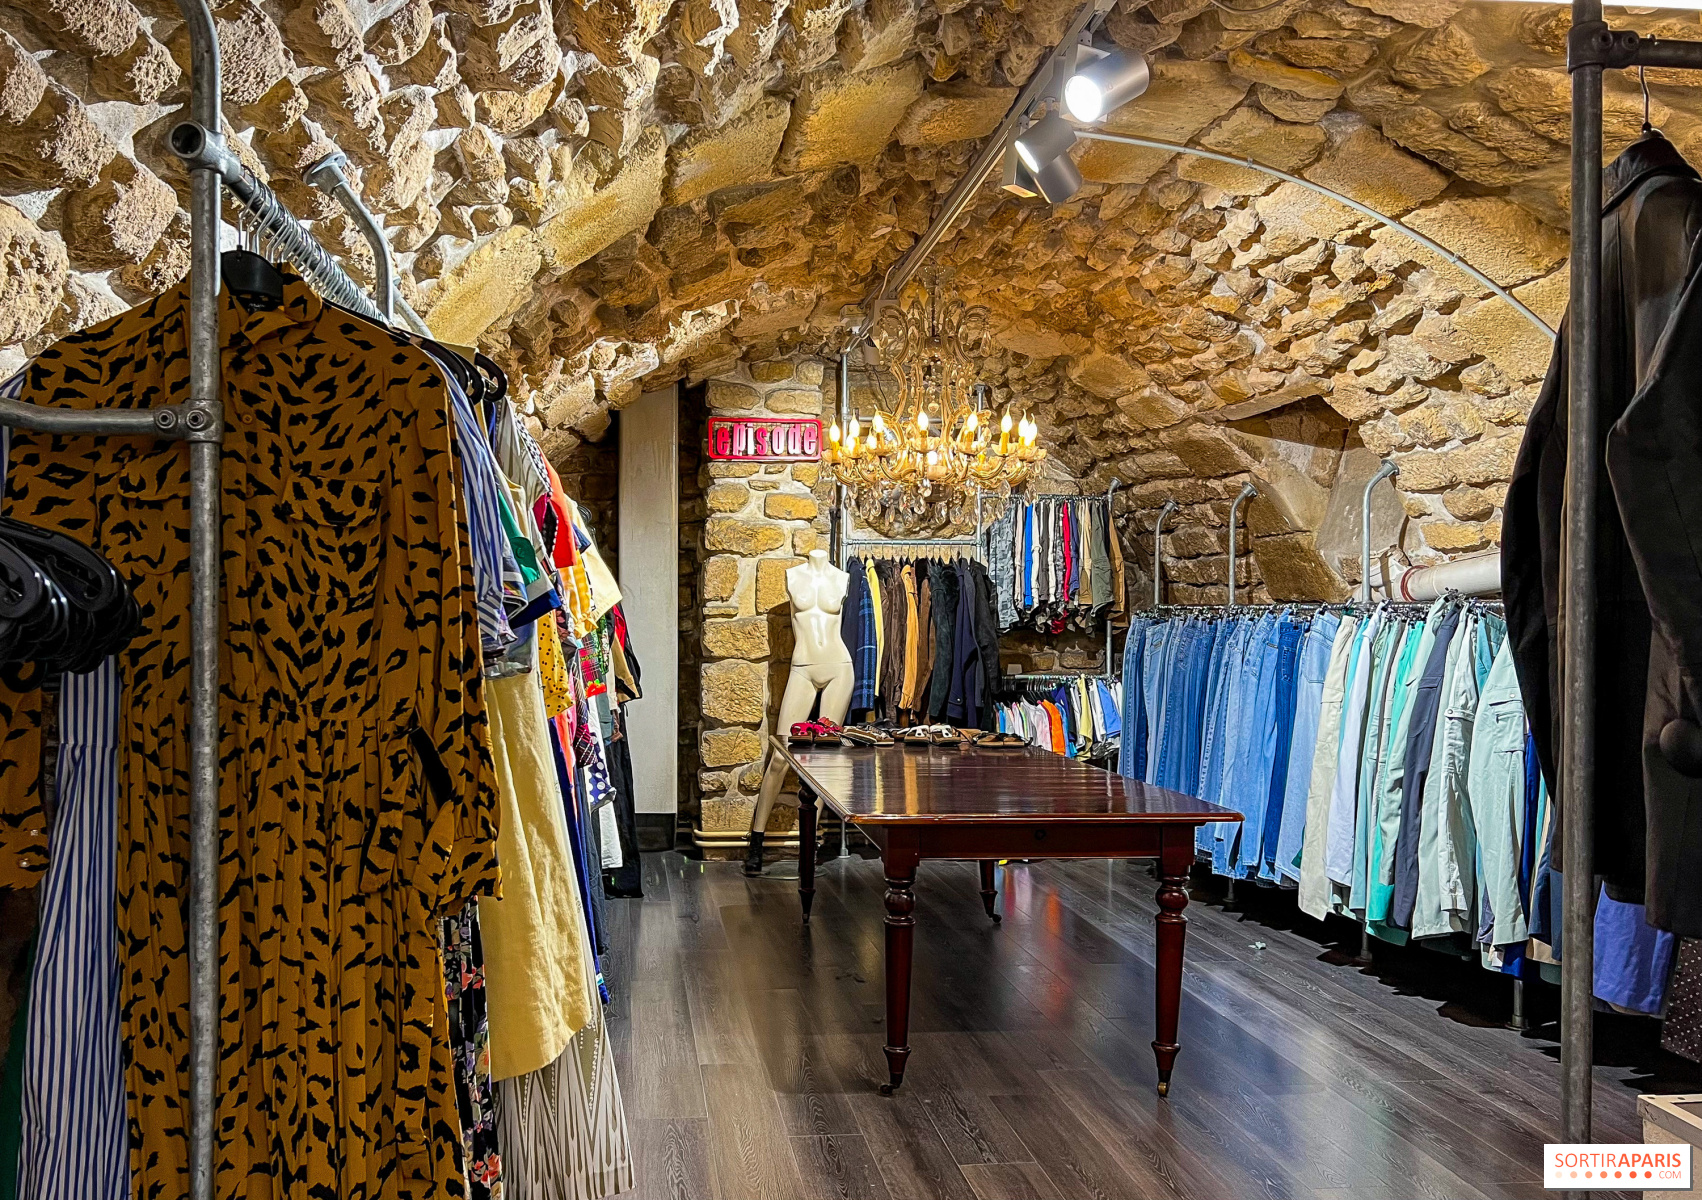 7 of The Best of Vintage Shopping and Thrift Stores in Paris